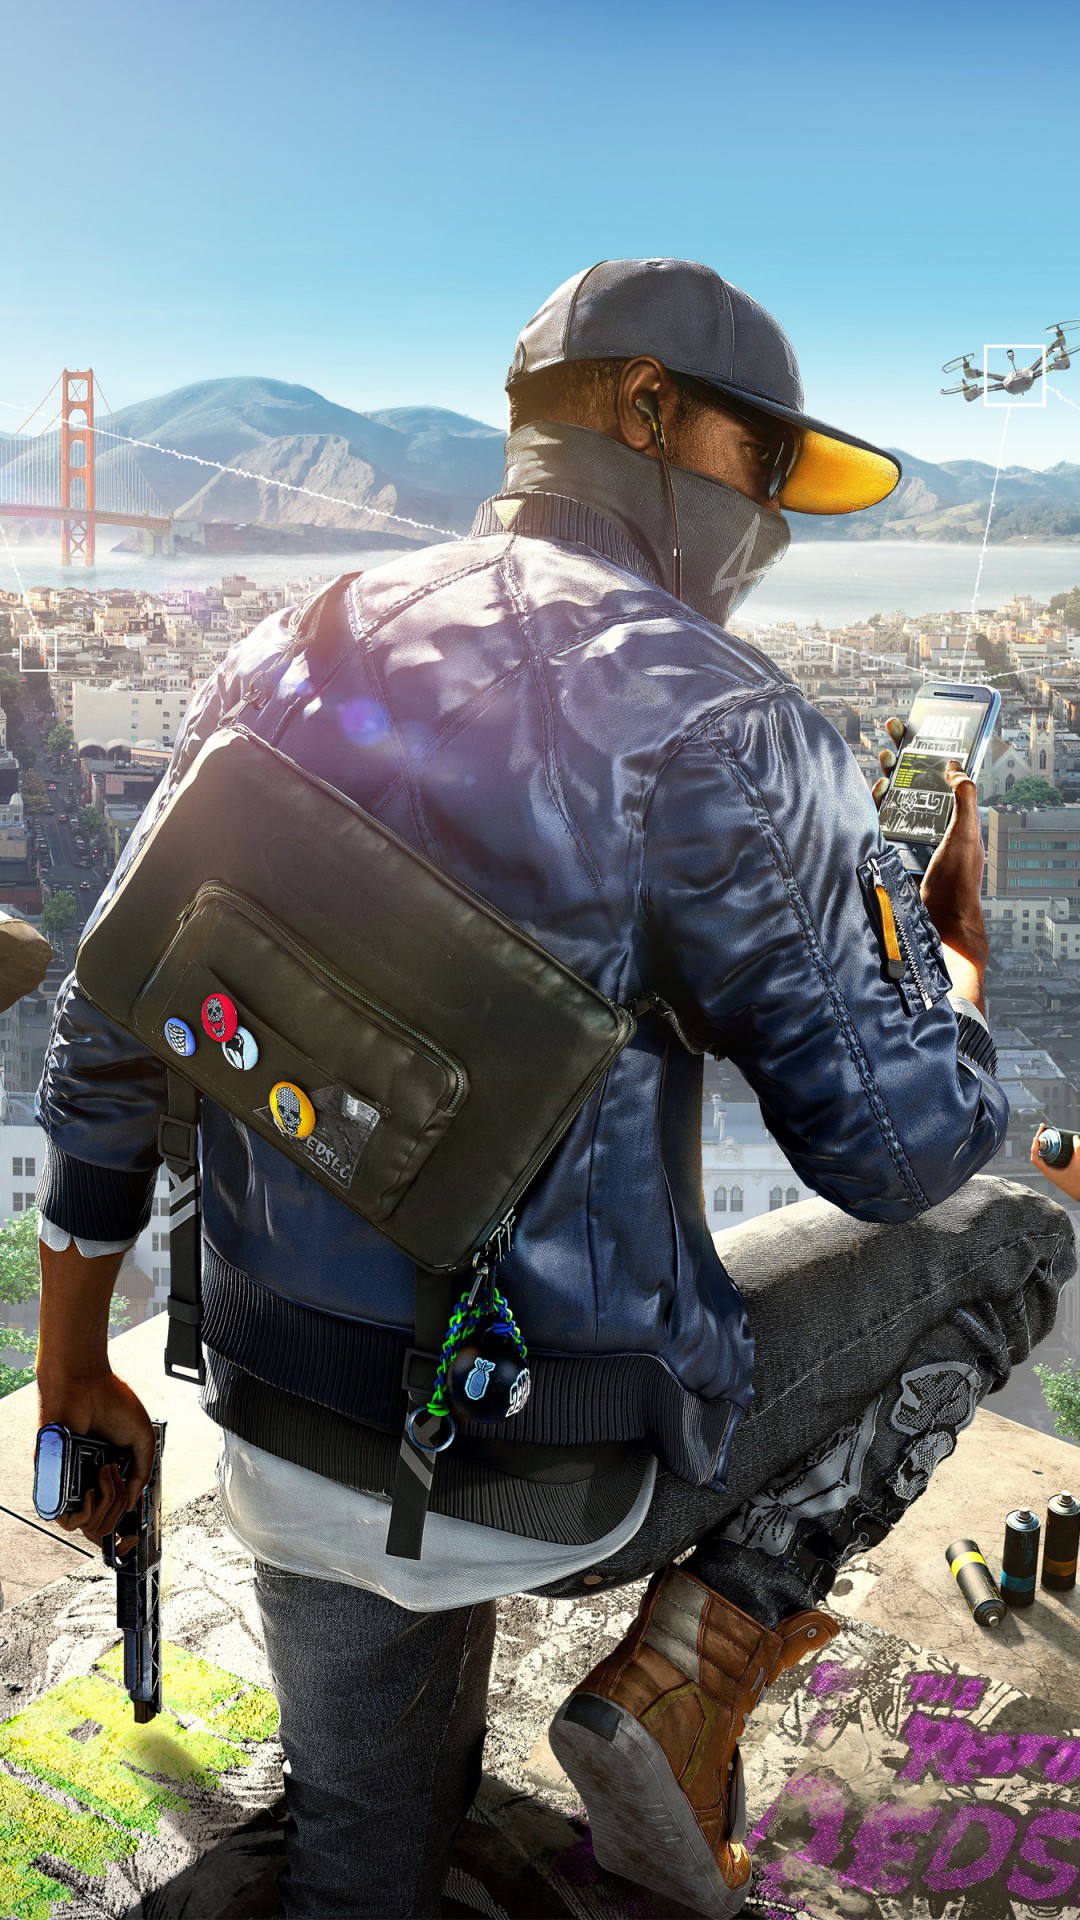 Watch Dogs 2 4K Hd Wallpaper for Desktop and Mobiles iPhone 6 / 6S Plus -  HD Wallpaper 